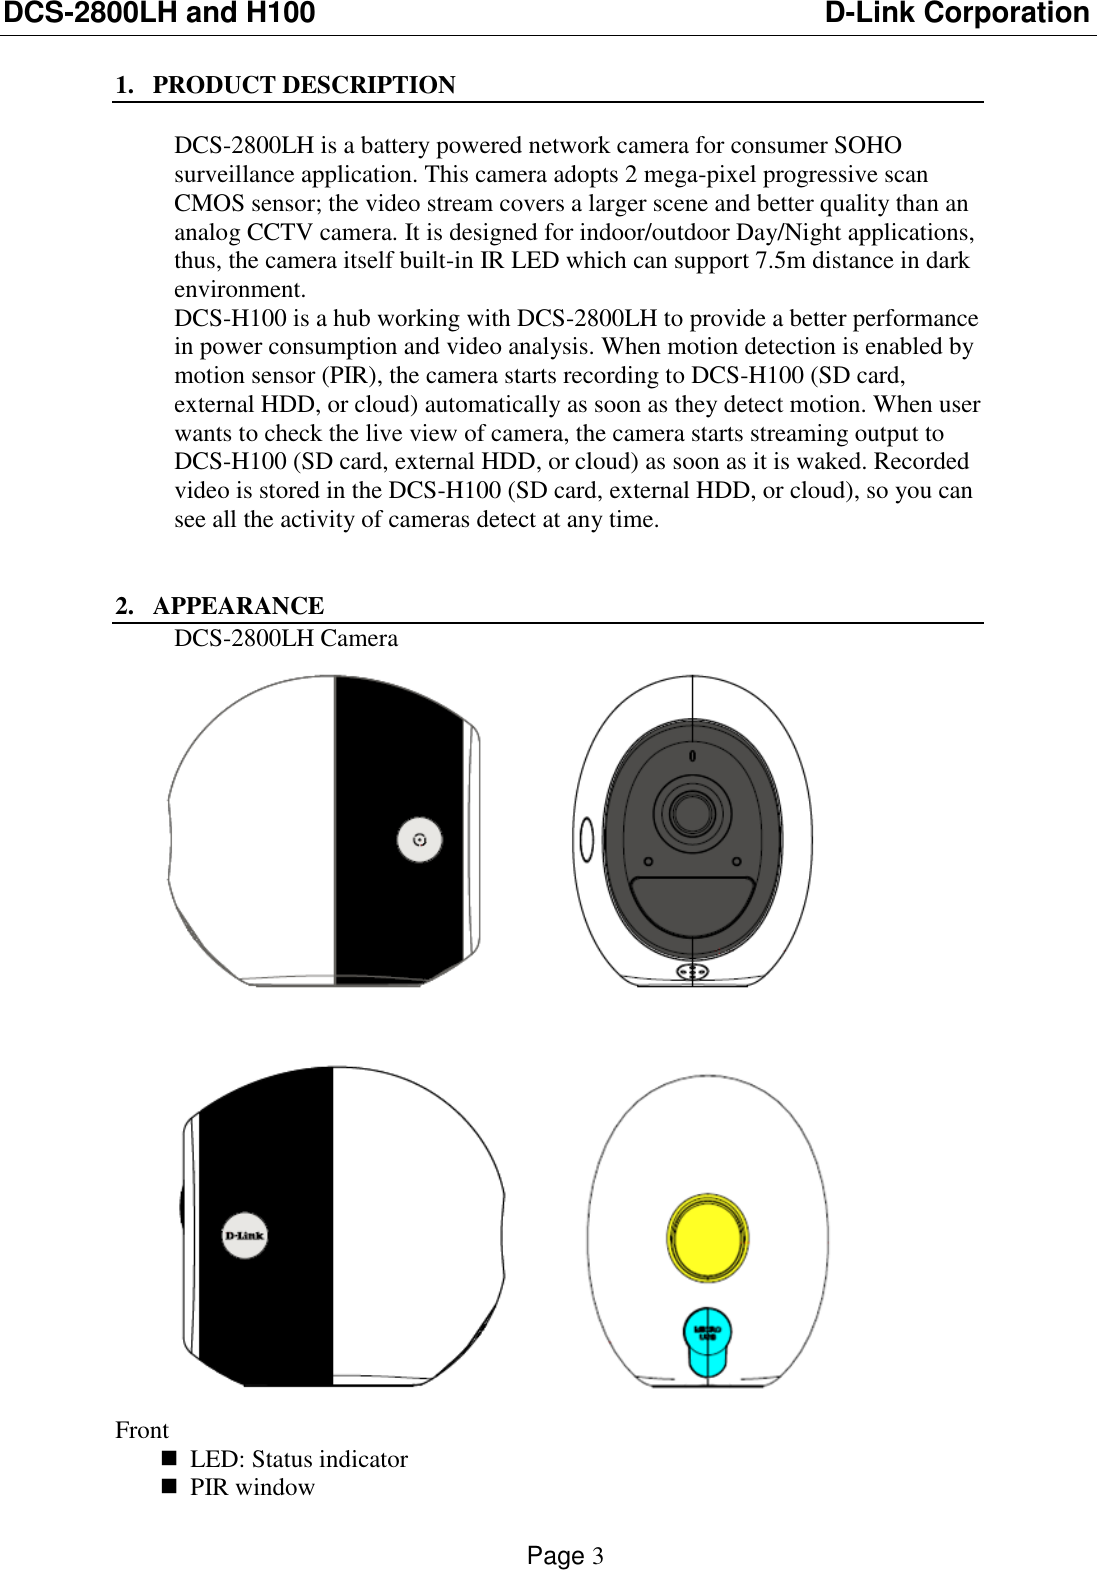 DCS-2800LH and H100                          D-Link Corporation    Page 3  1. PRODUCT DESCRIPTION  DCS-2800LH is a battery powered network camera for consumer SOHO surveillance application. This camera adopts 2 mega-pixel progressive scan CMOS sensor; the video stream covers a larger scene and better quality than an analog CCTV camera. It is designed for indoor/outdoor Day/Night applications, thus, the camera itself built-in IR LED which can support 7.5m distance in dark environment.  DCS-H100 is a hub working with DCS-2800LH to provide a better performance in power consumption and video analysis. When motion detection is enabled by motion sensor (PIR), the camera starts recording to DCS-H100 (SD card, external HDD, or cloud) automatically as soon as they detect motion. When user wants to check the live view of camera, the camera starts streaming output to DCS-H100 (SD card, external HDD, or cloud) as soon as it is waked. Recorded video is stored in the DCS-H100 (SD card, external HDD, or cloud), so you can see all the activity of cameras detect at any time.   2. APPEARANCE DCS-2800LH Camera    Front  LED: Status indicator   PIR window 